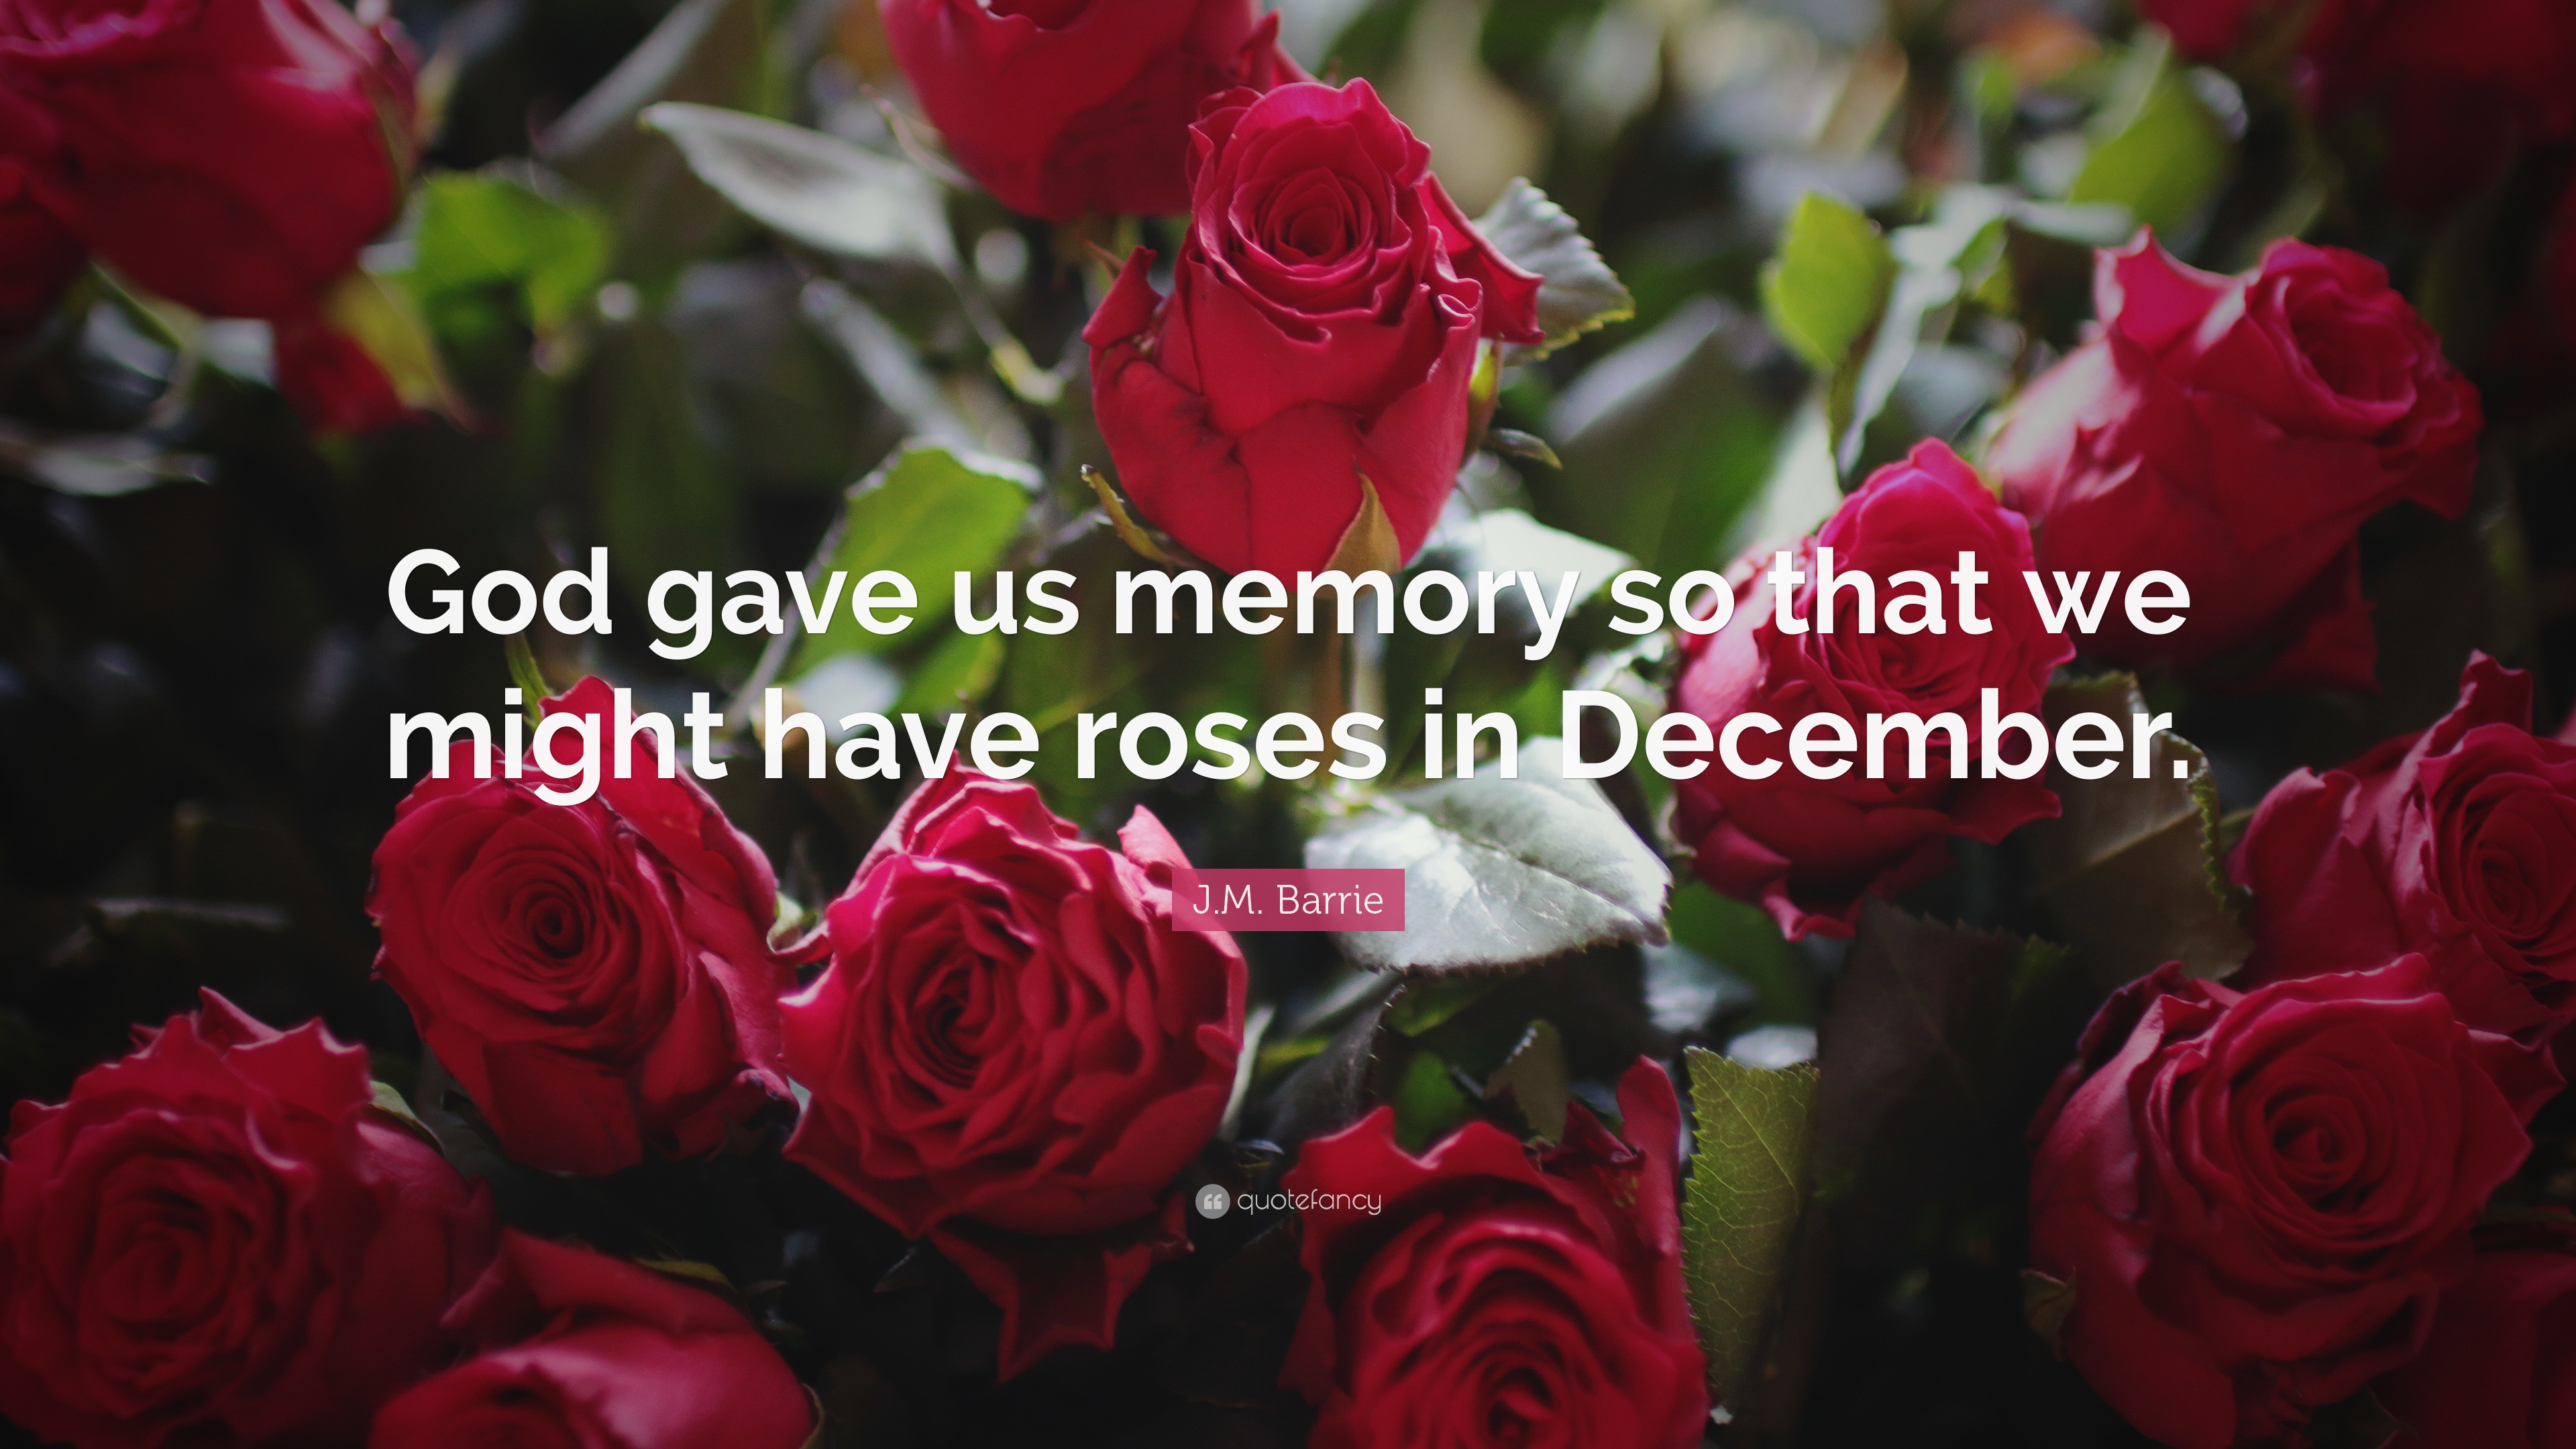 J.M. Barrie Quote: “God gave us memory so that we might have roses ...